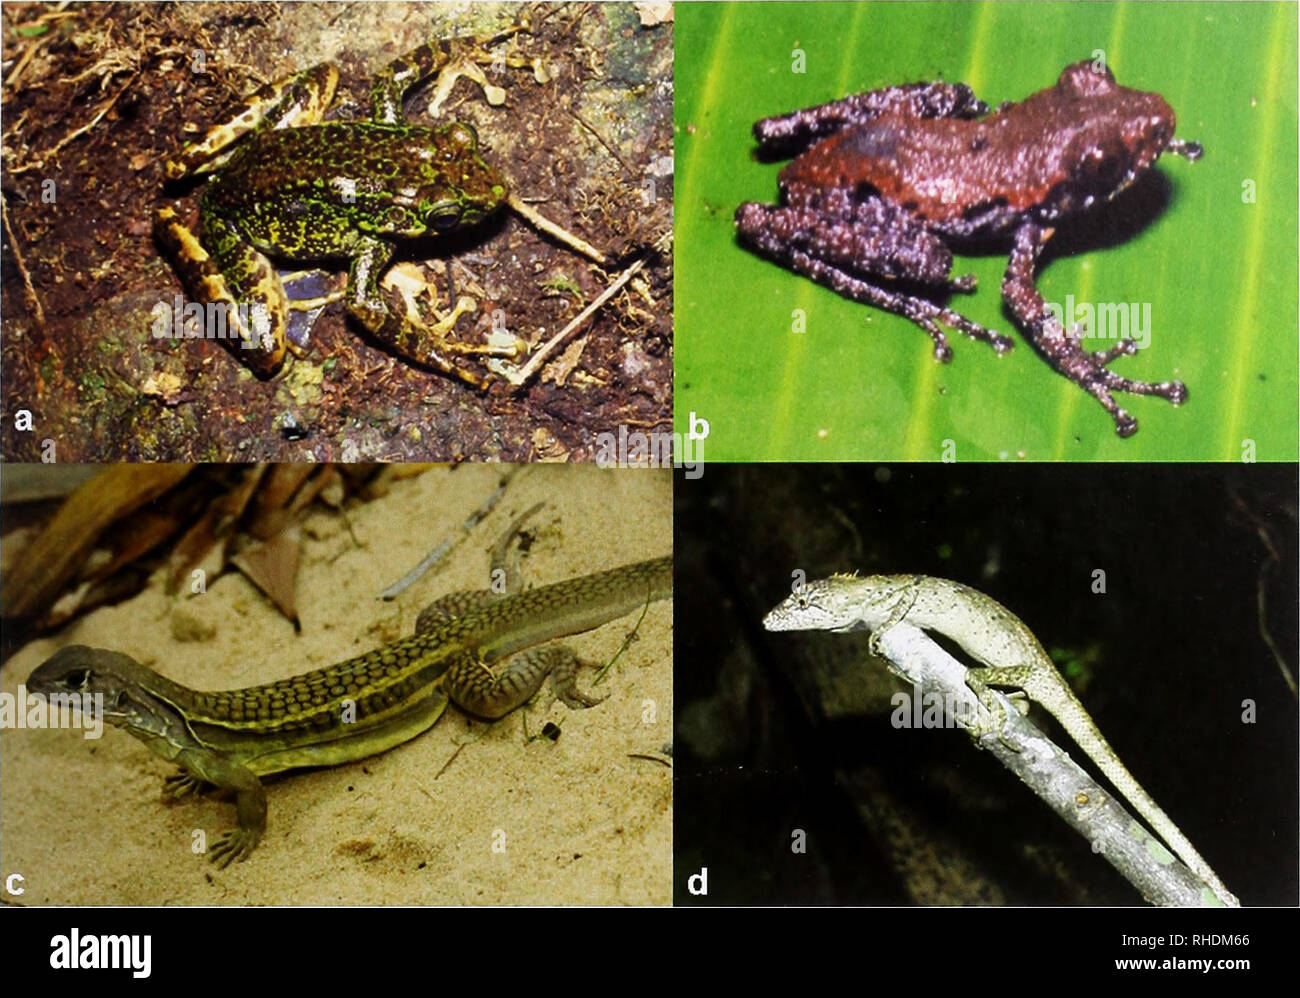 . Bonn zoological bulletin. Zoology. New amphibians and reptiles from Vietnam 139. Fig. 1. a) Odorrana geminata from Ha Giang Province, Photo T.Q. Nguyen; b) Theloderma lateriticum from Lao Cai Province, Photo T.Q. Nguyen; c) Leiolepis ngovantrii from Ba Ria-Vung Tau Province, Photo L.L. Grismer; and d) Pseudocalotes ziegleri from Kon Turn Province, Photo C.T. Ho. Rhacophoridae Theloderma lateriticum Bain, Nguyen &amp; Doan, 2009 Theloderma lateriticum R.H. Bain, T.Q. Nguyen &amp; K.V. Doan, 2009, Zootaxa 2191: 60. Holotype: AMNH 168757/IEBR A. 0860. Type locality: Nam Tha Commune, Van Ban Dis Stock Photo